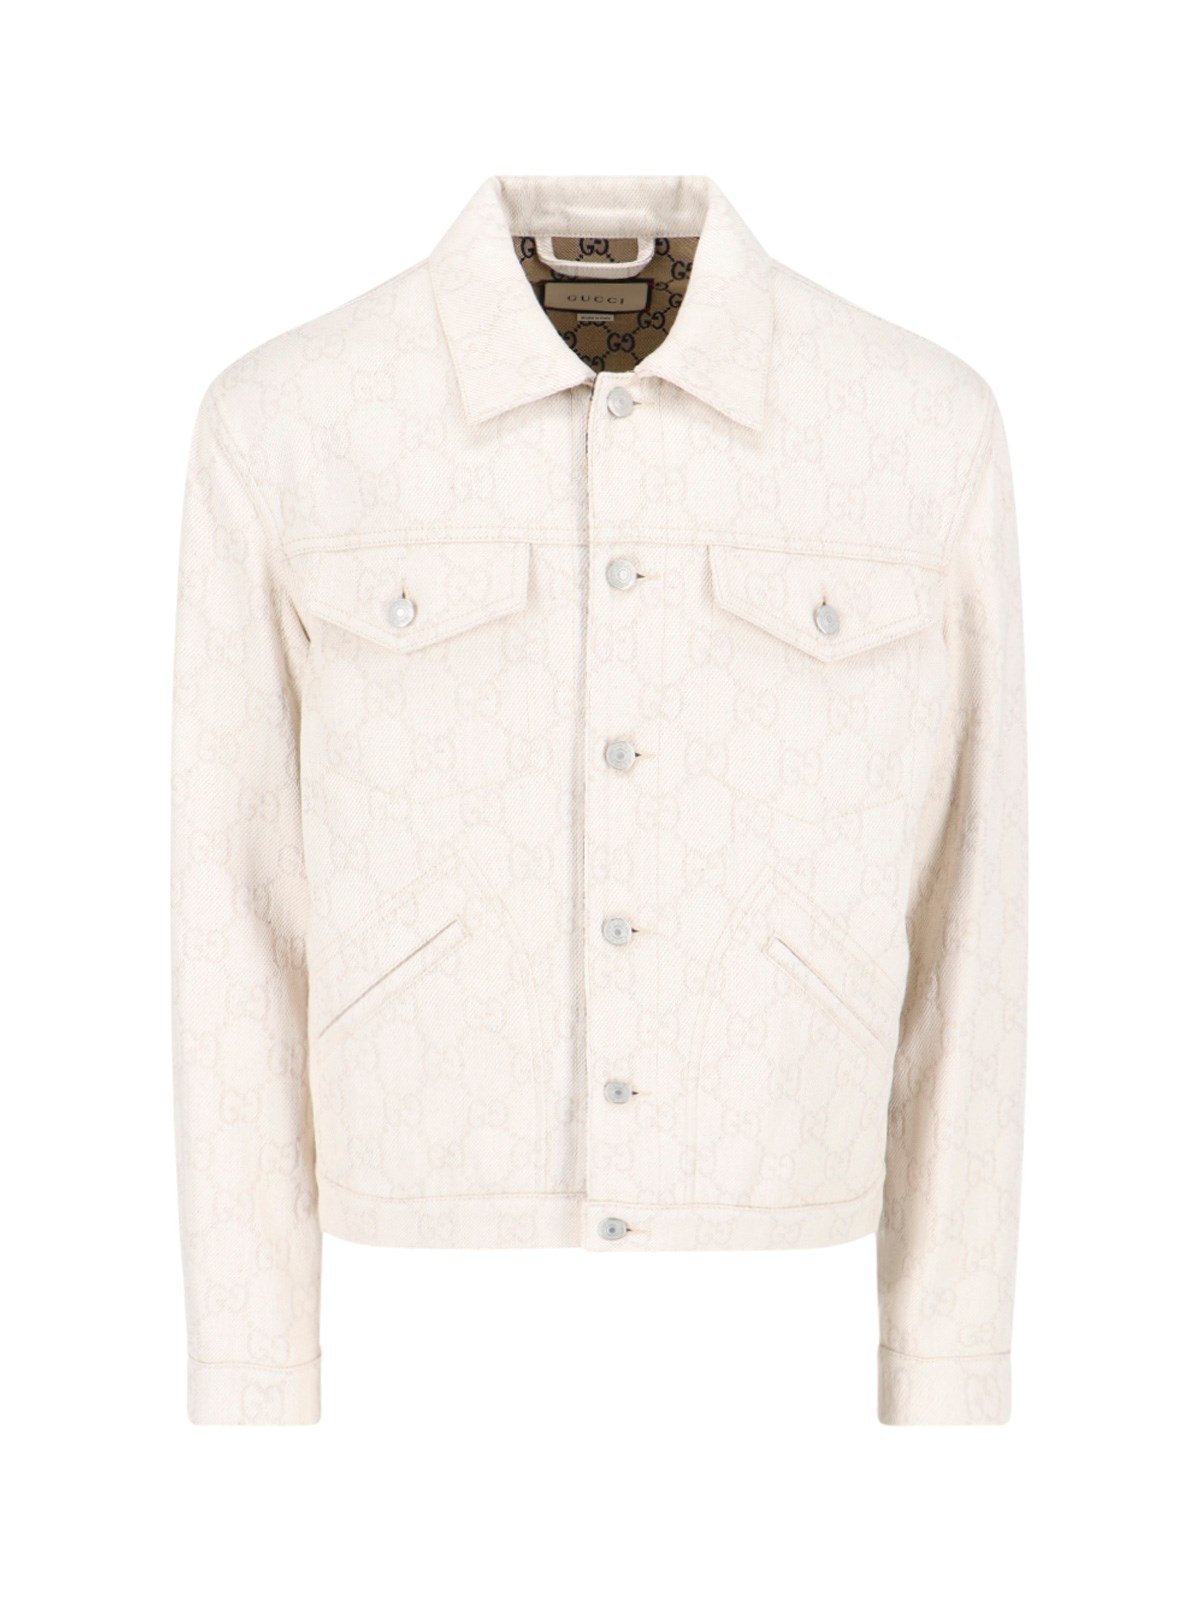 Gucci 'gg' Jacket In White